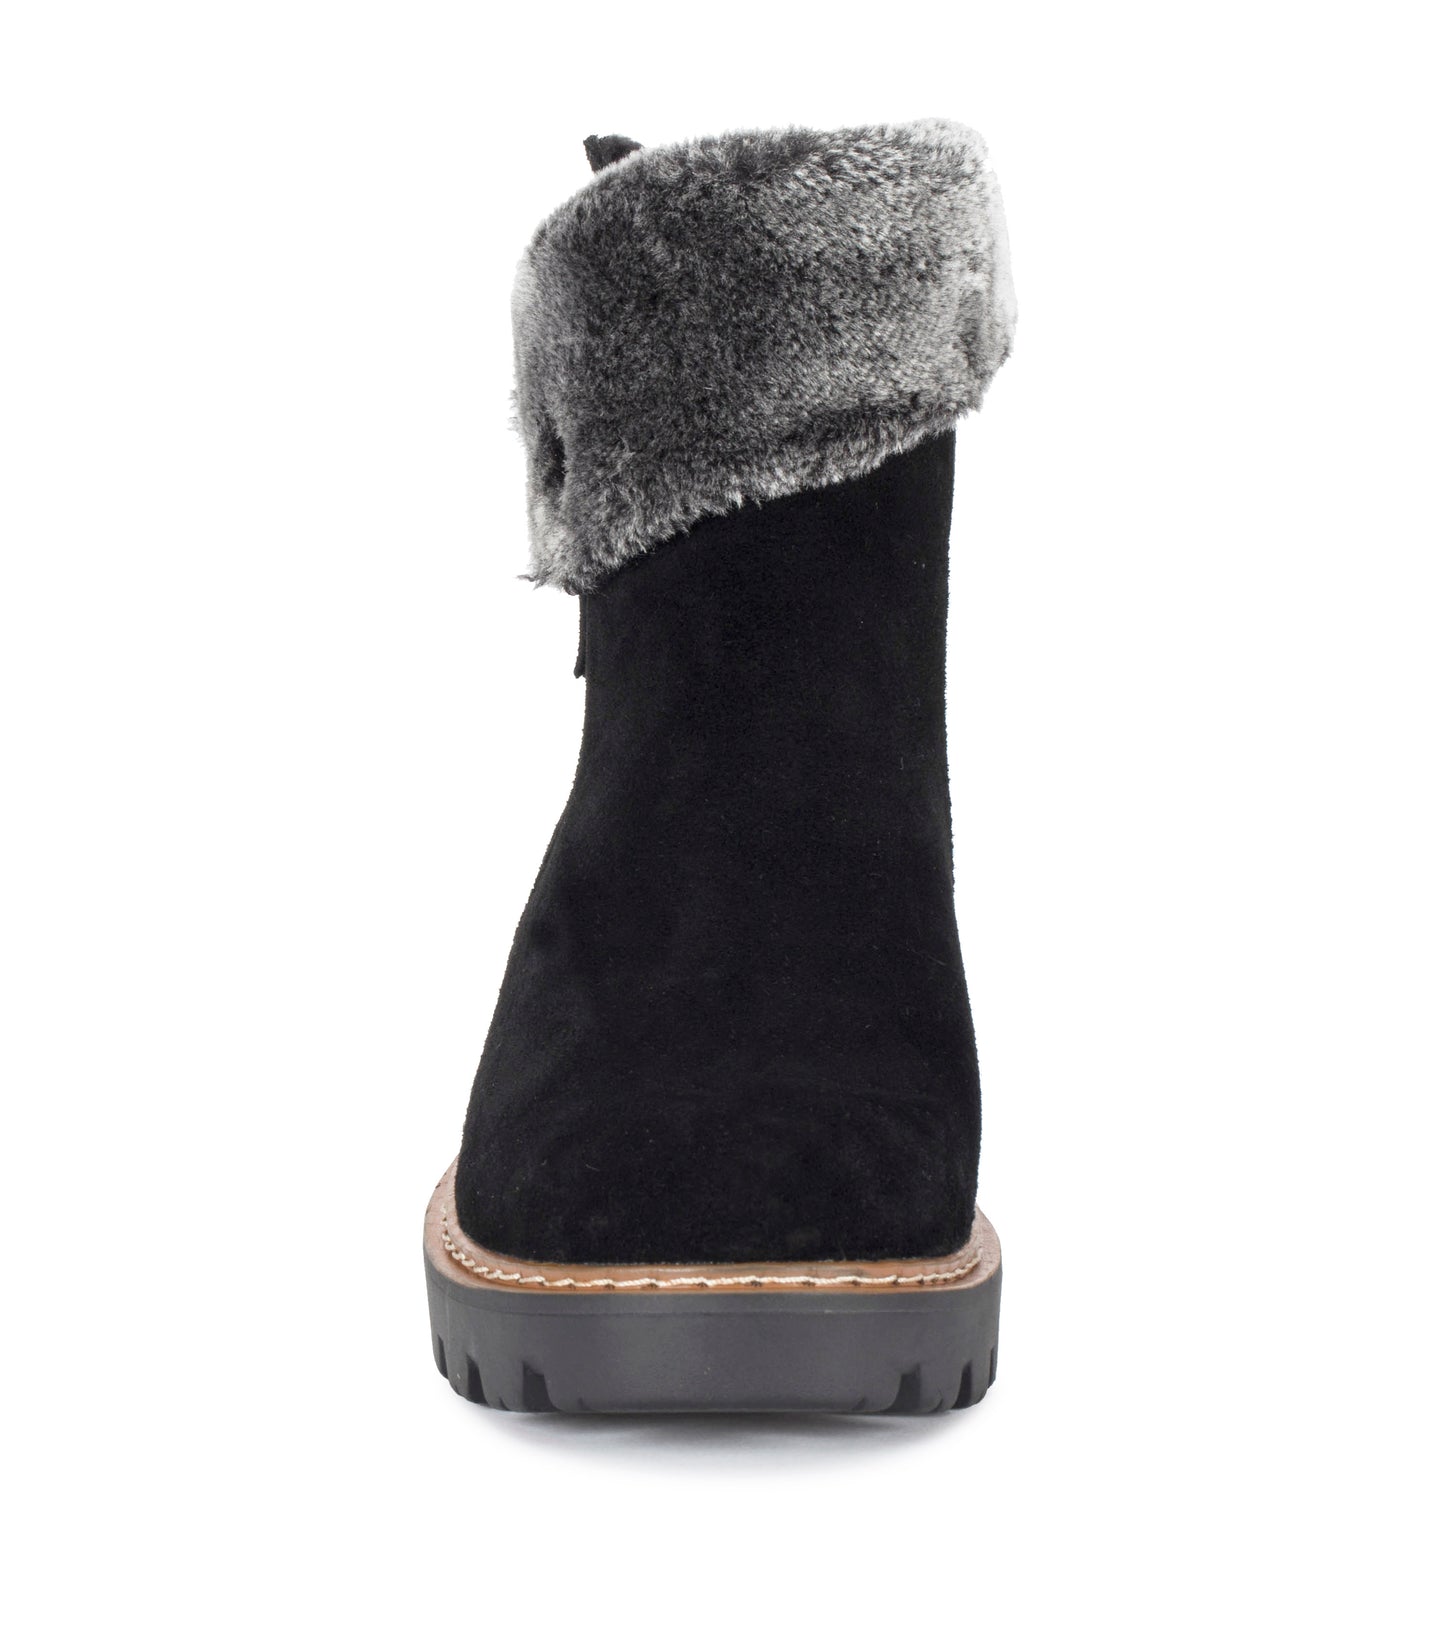 Wyoming - Black Suede - Front